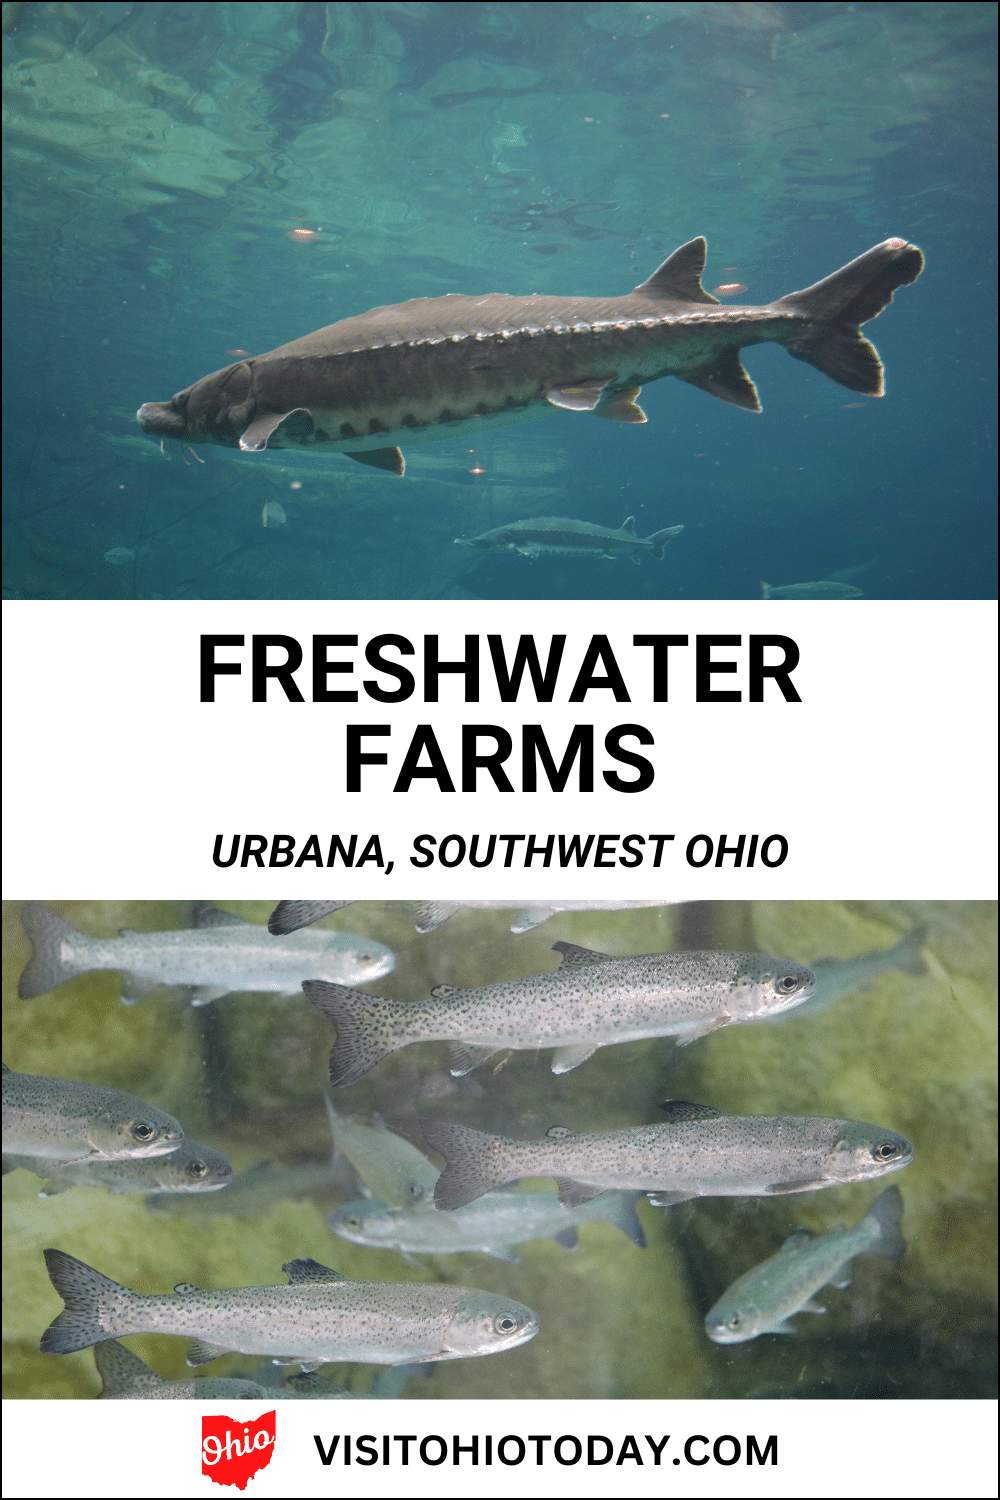 Freshwater Farms is in Urbana, southwest Ohio. It is Ohio's largest indoor fish hatchery and is home to the Ohio Fish and Shrimp Festival each year. Enjoy lots of activities here!